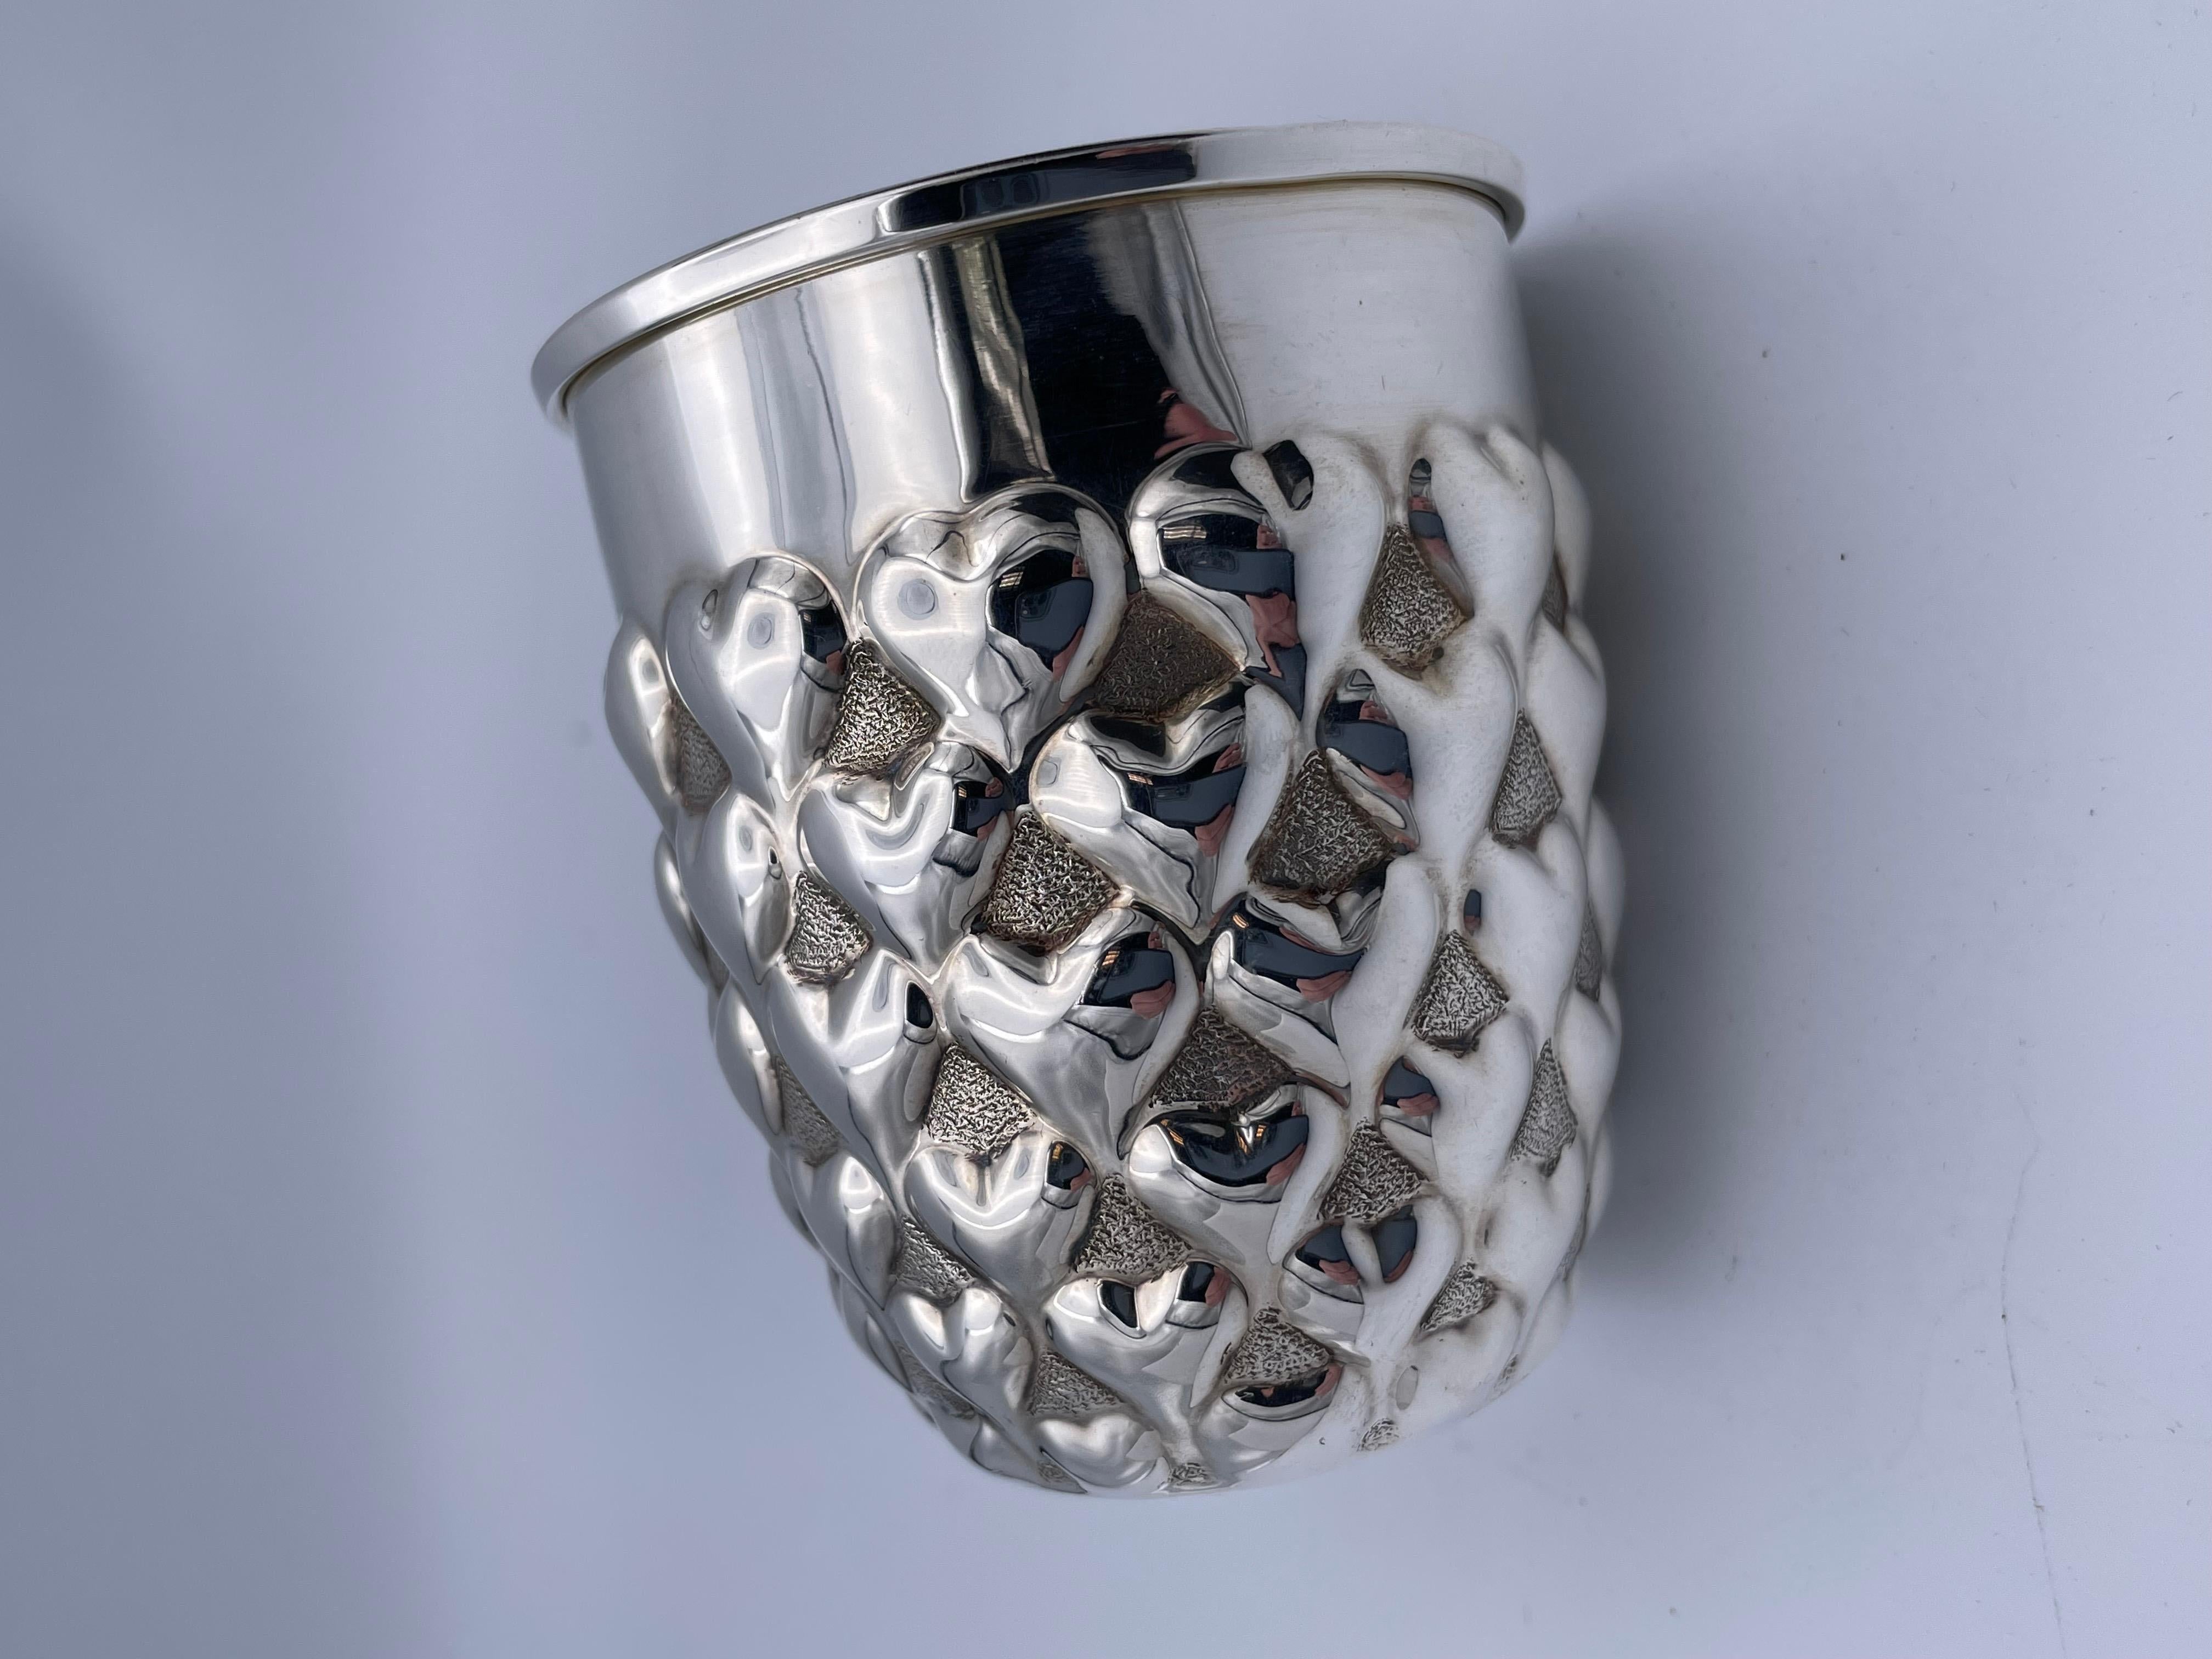 A charming cup, with an allover figural puffed heart design. Made by TIFFANY & CO. Solid gauge sterling silver with a lemon gilt interior. Can be used as a cup or a holder for flowers or a desk container. 2 1/4